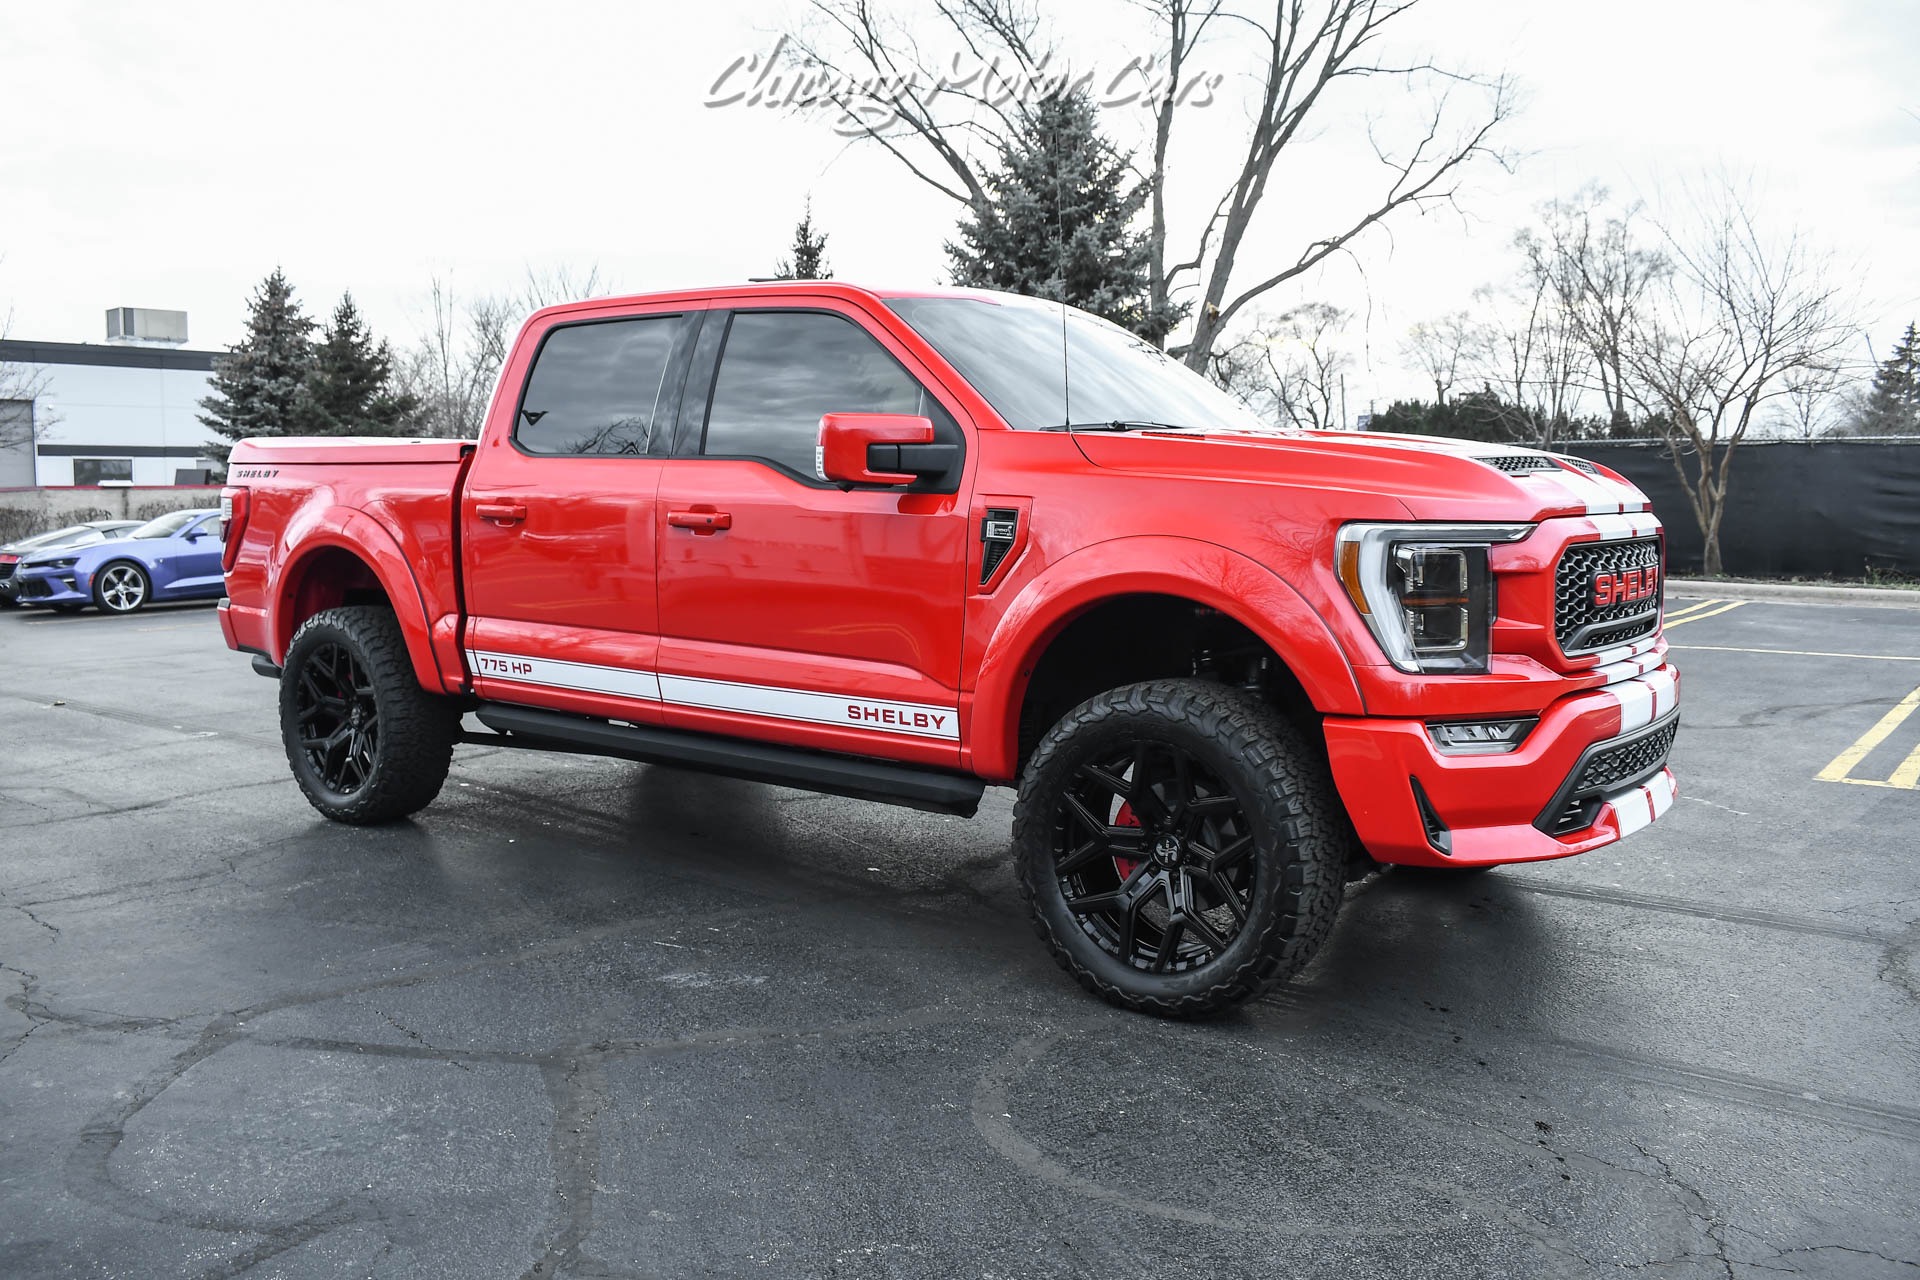 Used-2021-Ford-F-150-4X4-Supercrew-Lariat-Shelby-775HP-ONLY-1423-Miles-SUPER-RARE-LOADED